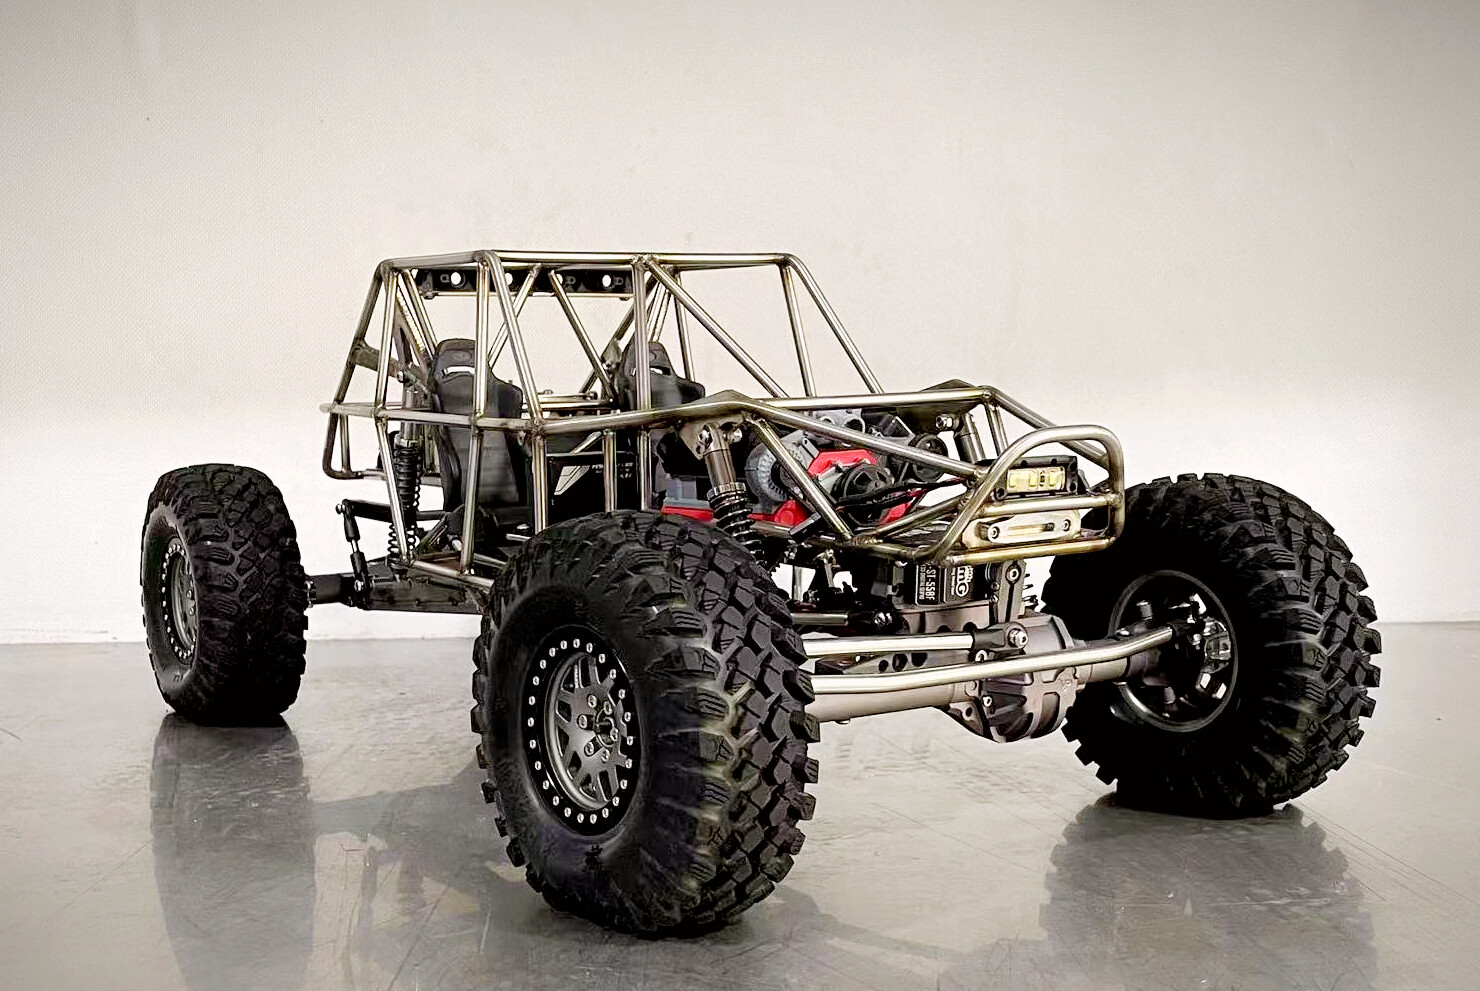 B2 Trail Buggy RC chassis for Vanquish platforms. Standard Set from USD539 (Deposit USD150)